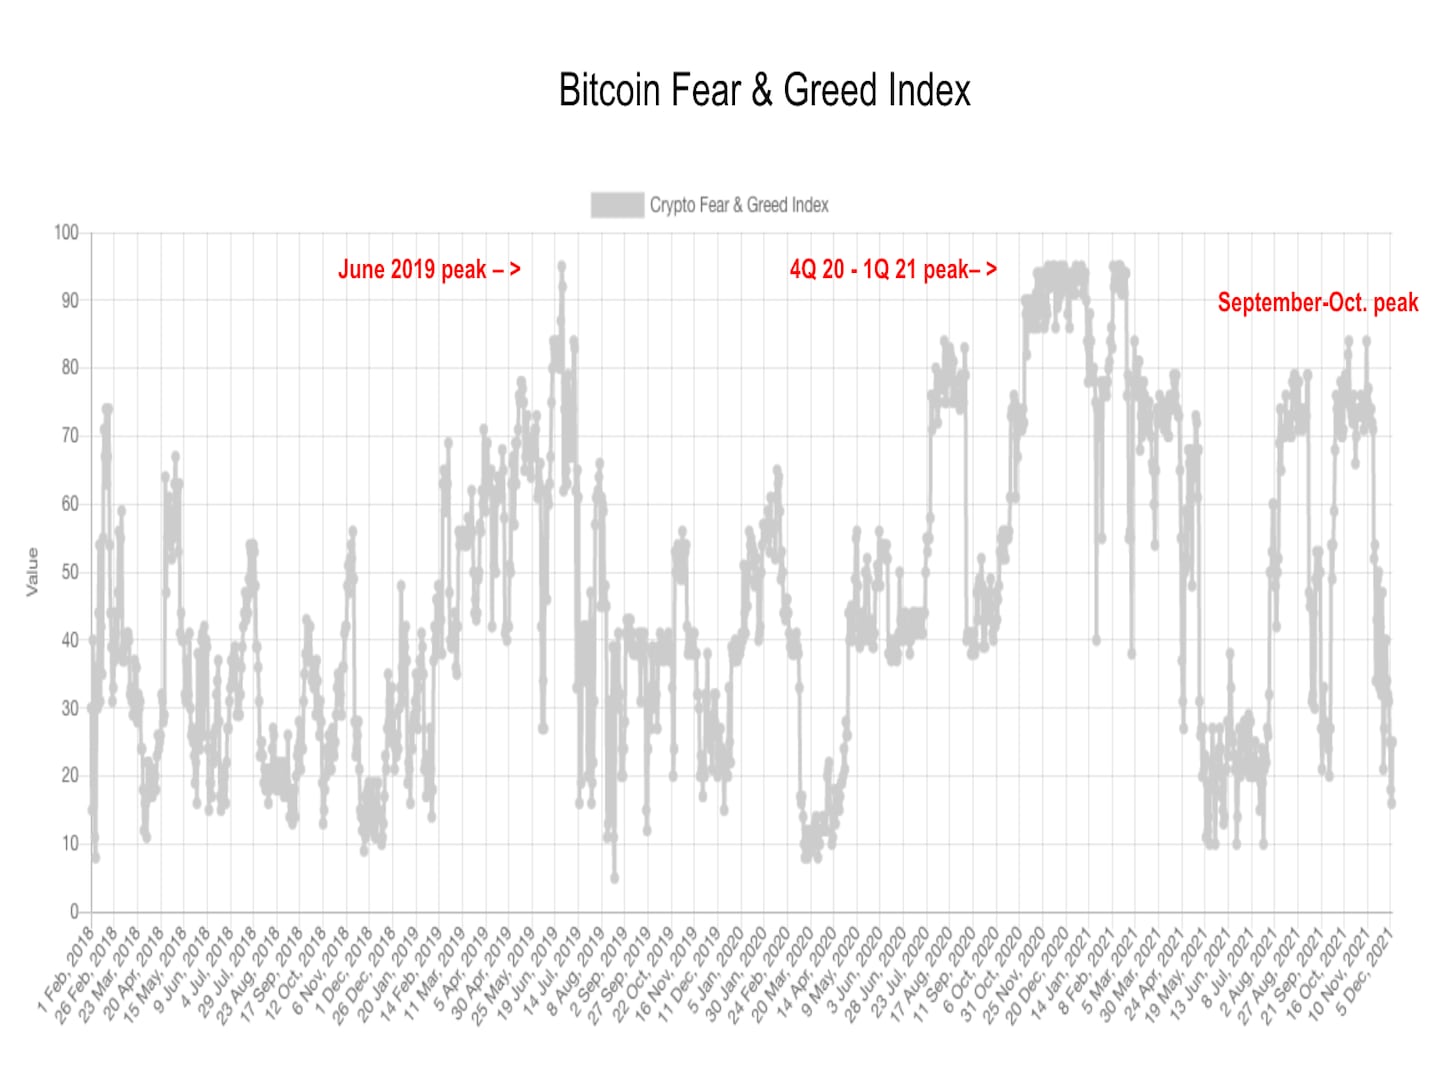 Crypto Fear & Greed Index (Alternative.me, CoinDesk)